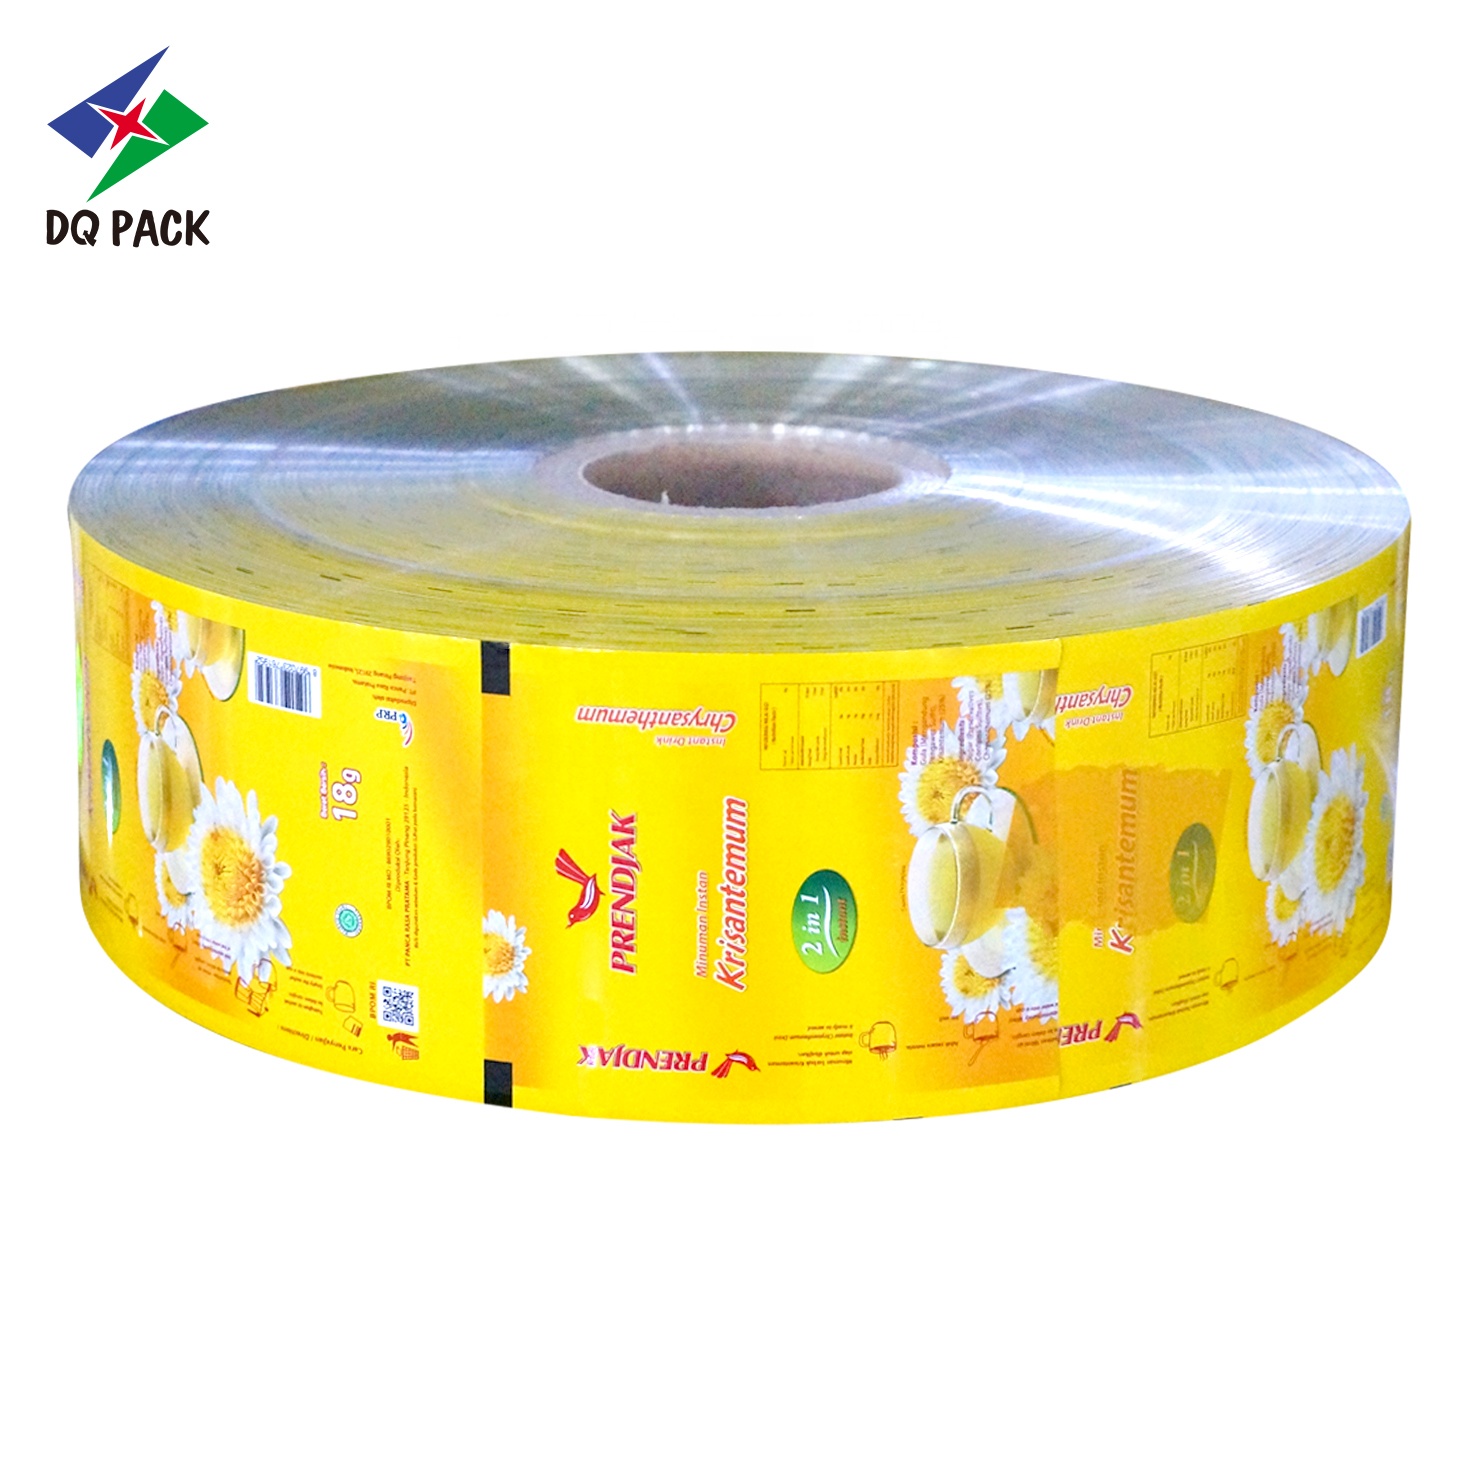 DQ PACK China custom printed auto packing film plastic metallized roll film for tea candy chocolate chips food packaging